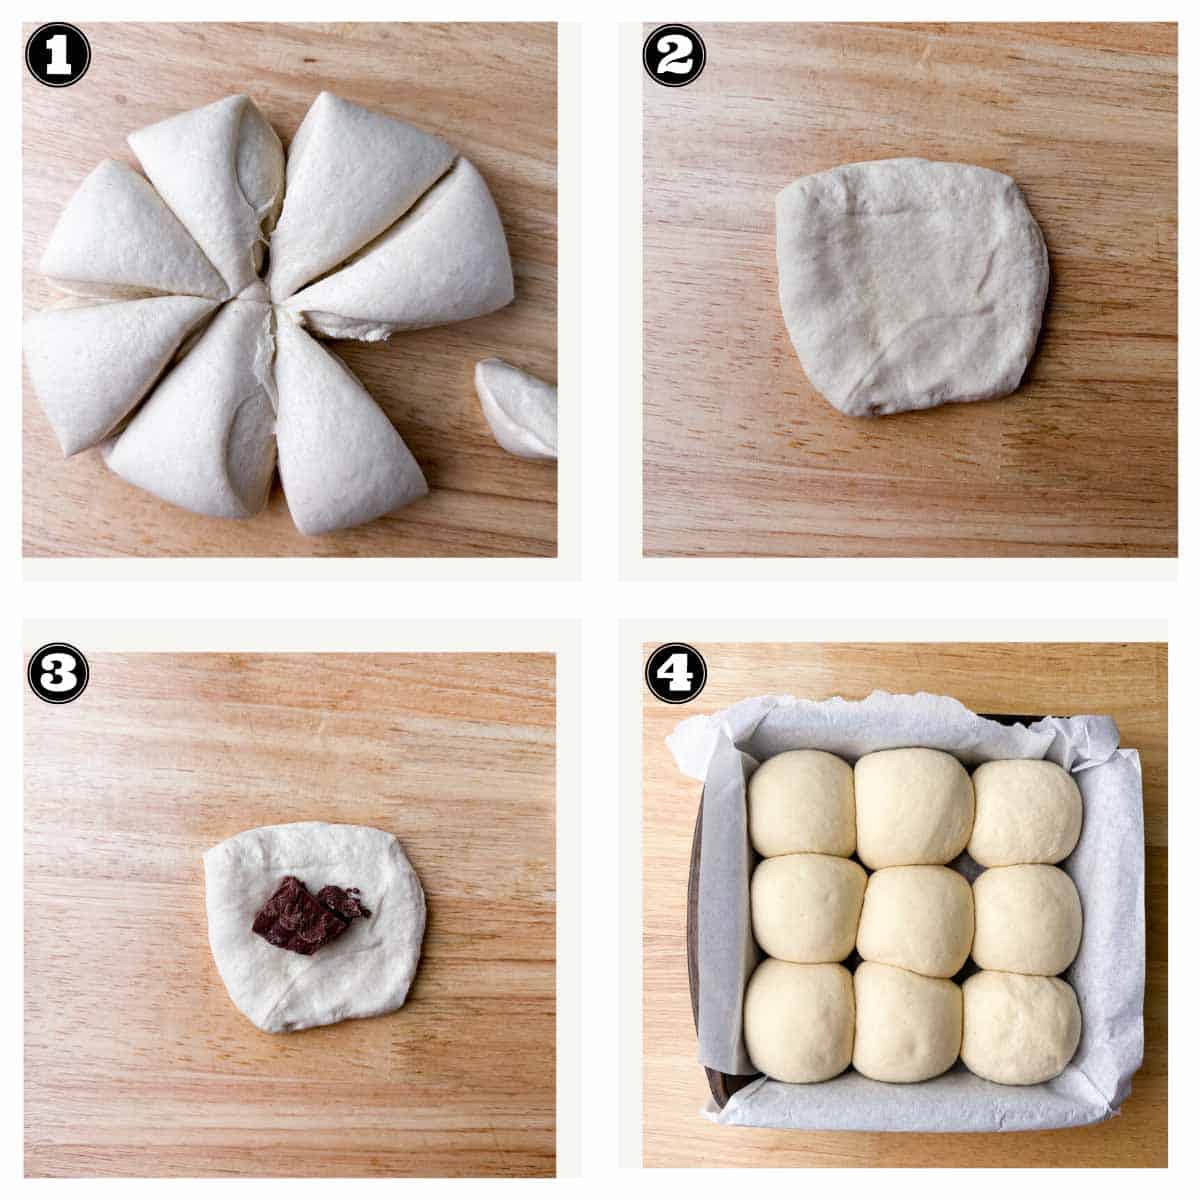 collage of images showcasing the shaping and proofing of the buns